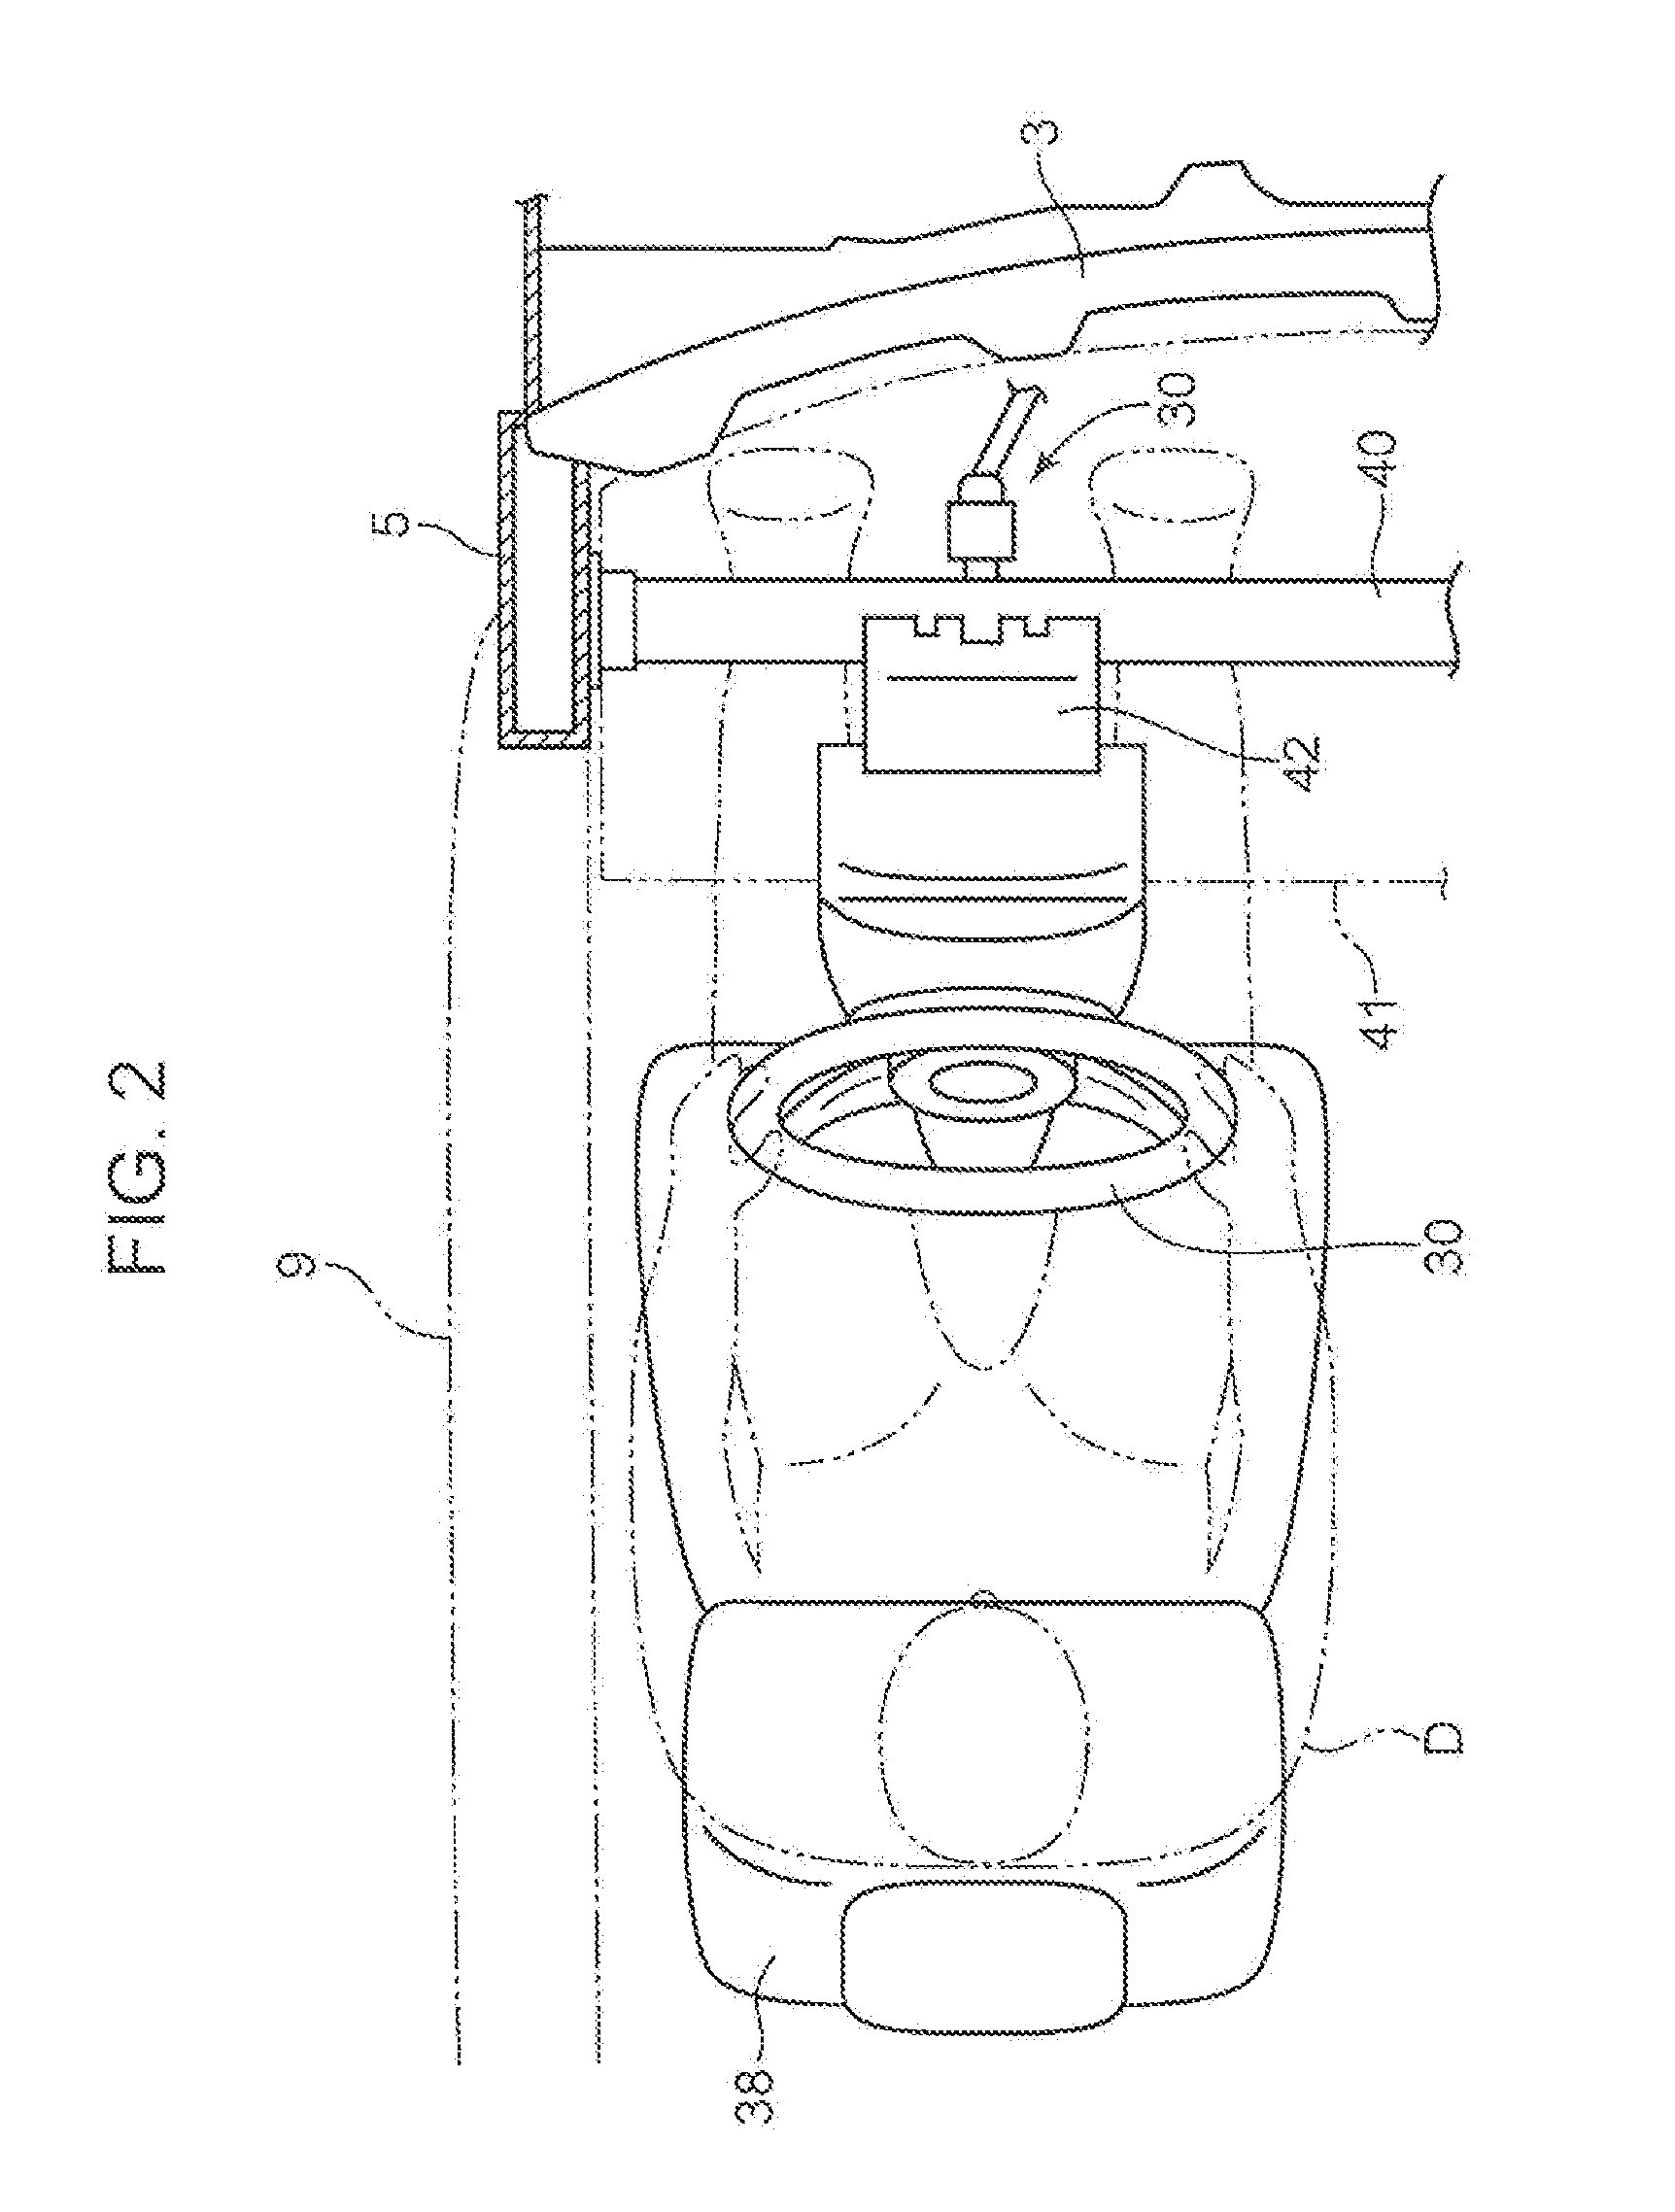 Airbag apparatus and vehicle equipped with same